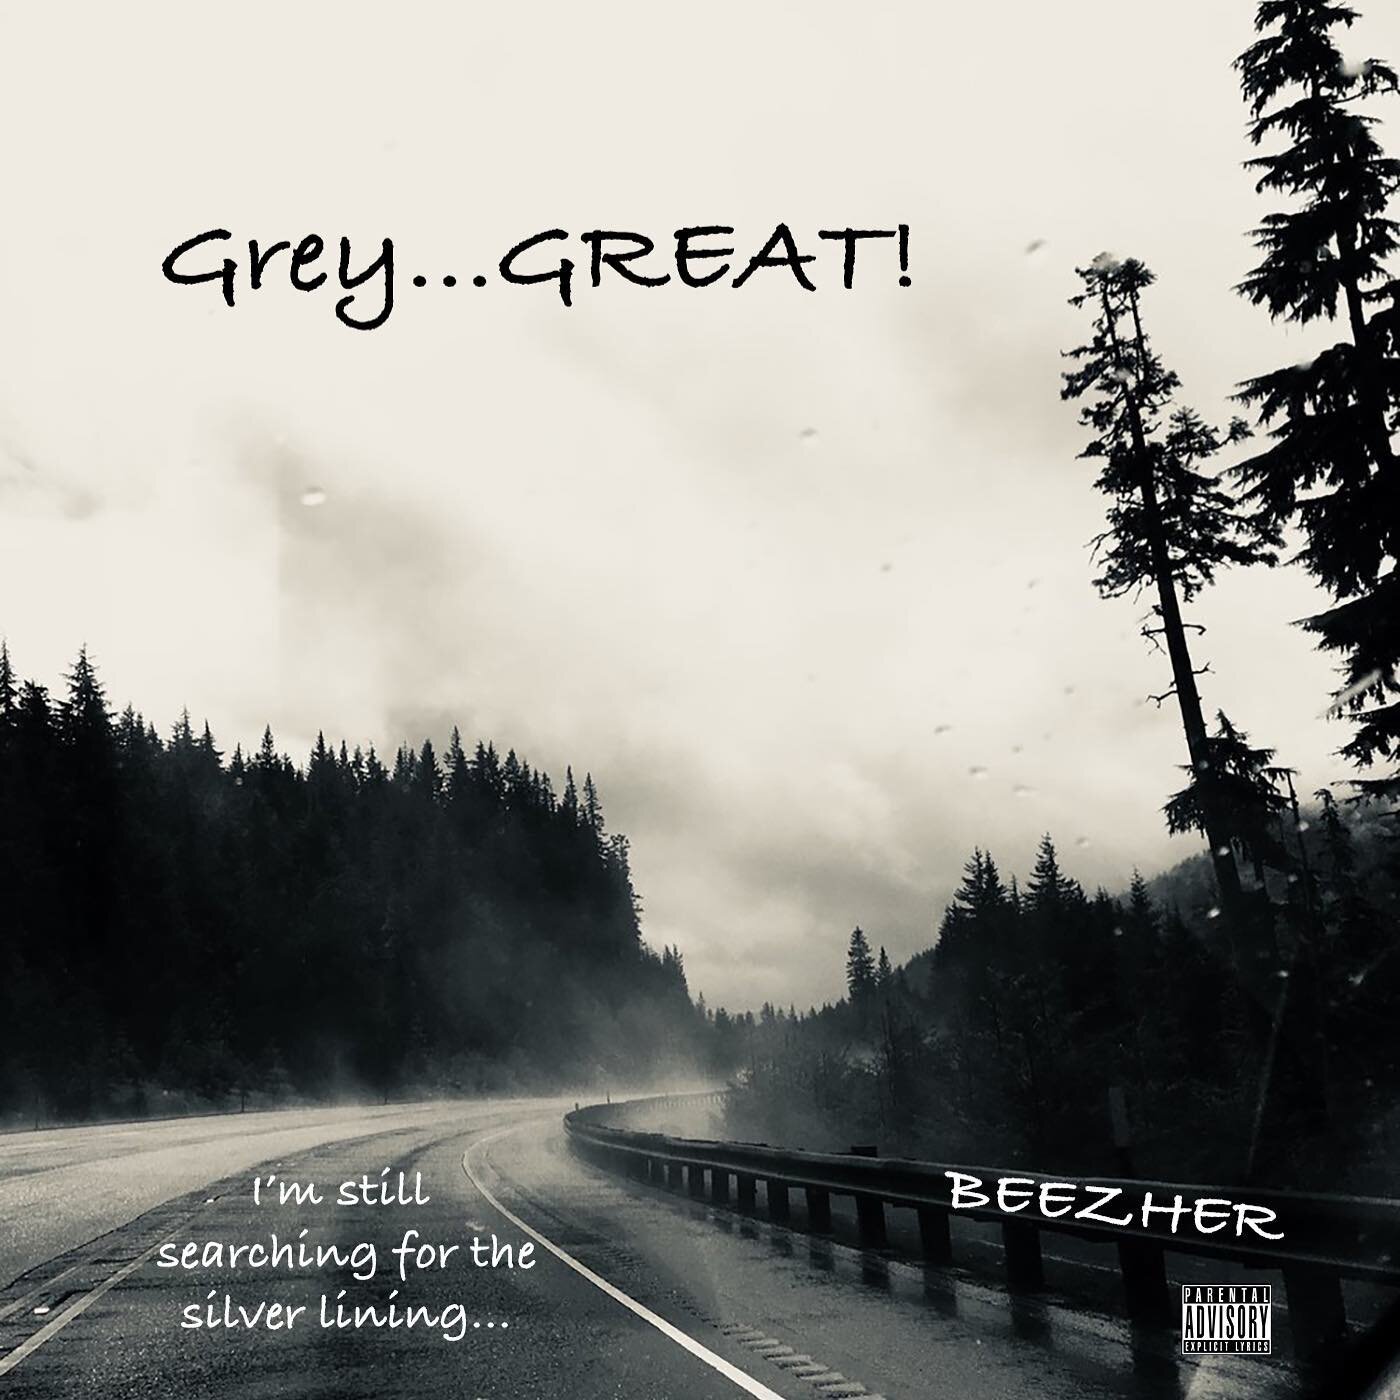 &quot;Grey-GREAT!&quot; My protest song for healing - we, and particularly their families &amp; loved ones need justice for those killed by police. Rest in Power. .
https://open.spotify.com/album/7ioc1XYP8PjSruFQRrTqVx?si=dAuplqh7QO2vI73o-EQBnQ